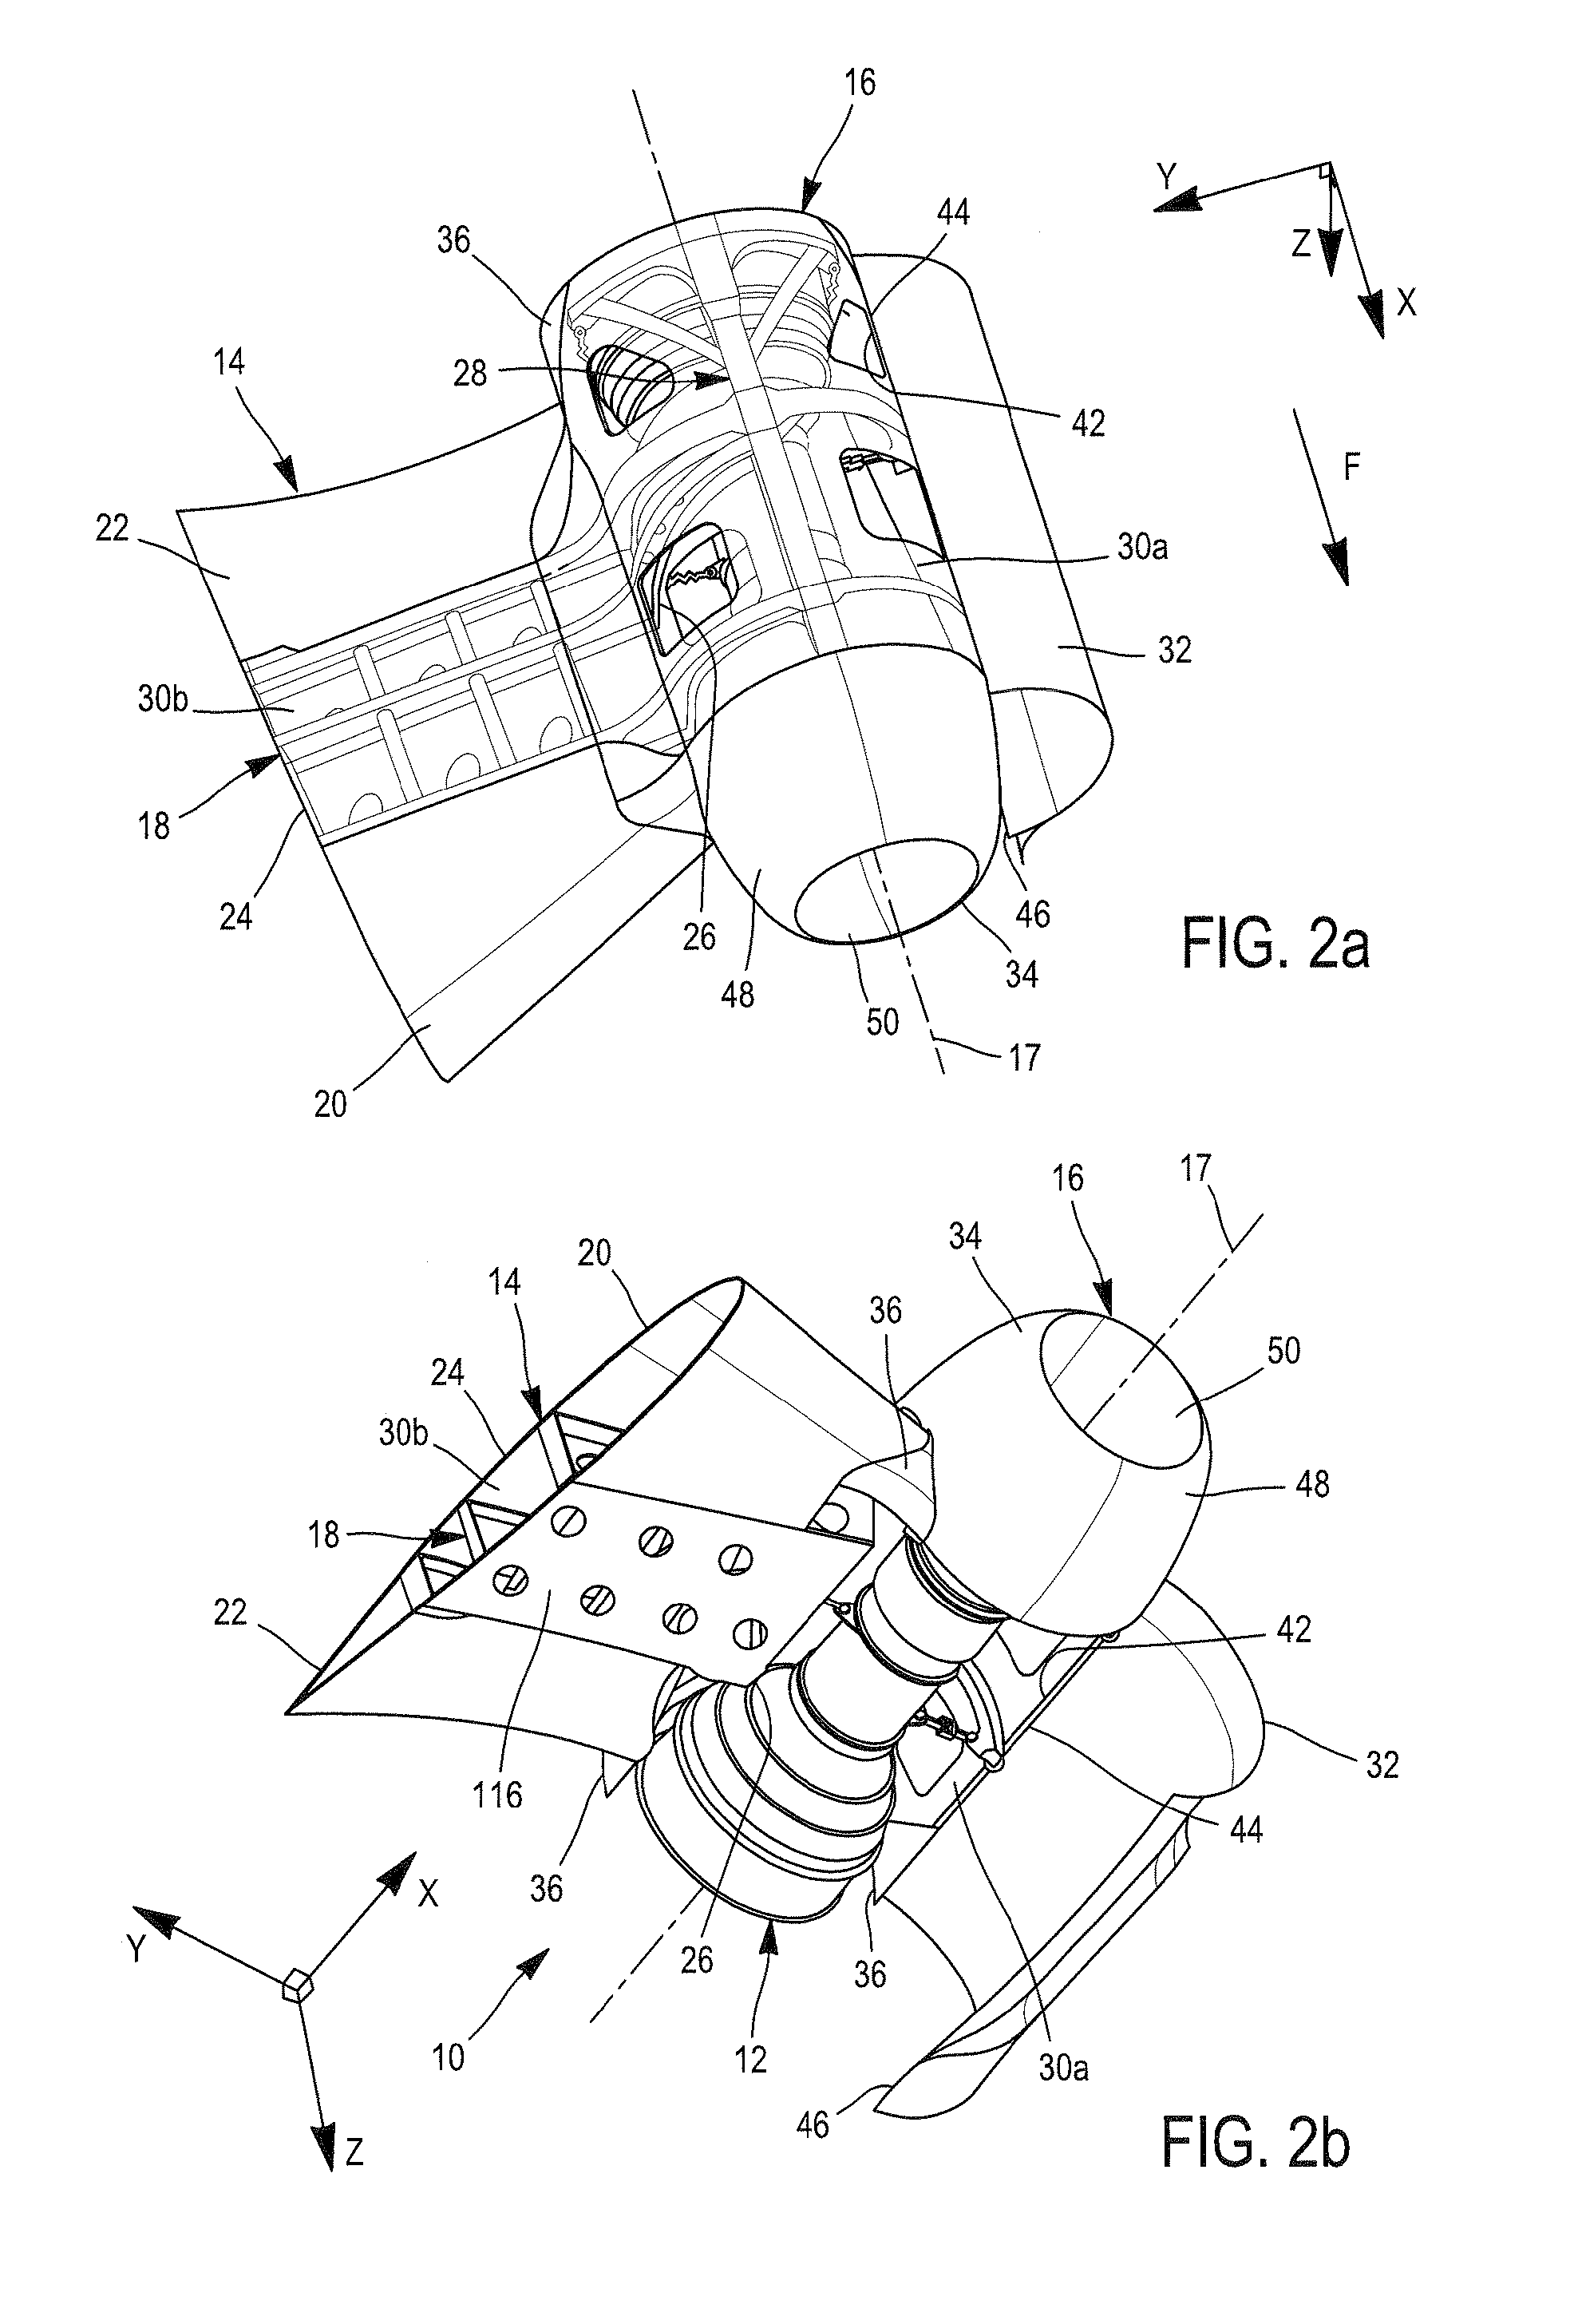 Lateral propulsion unit for aircraft comprising a turbine engine support arch